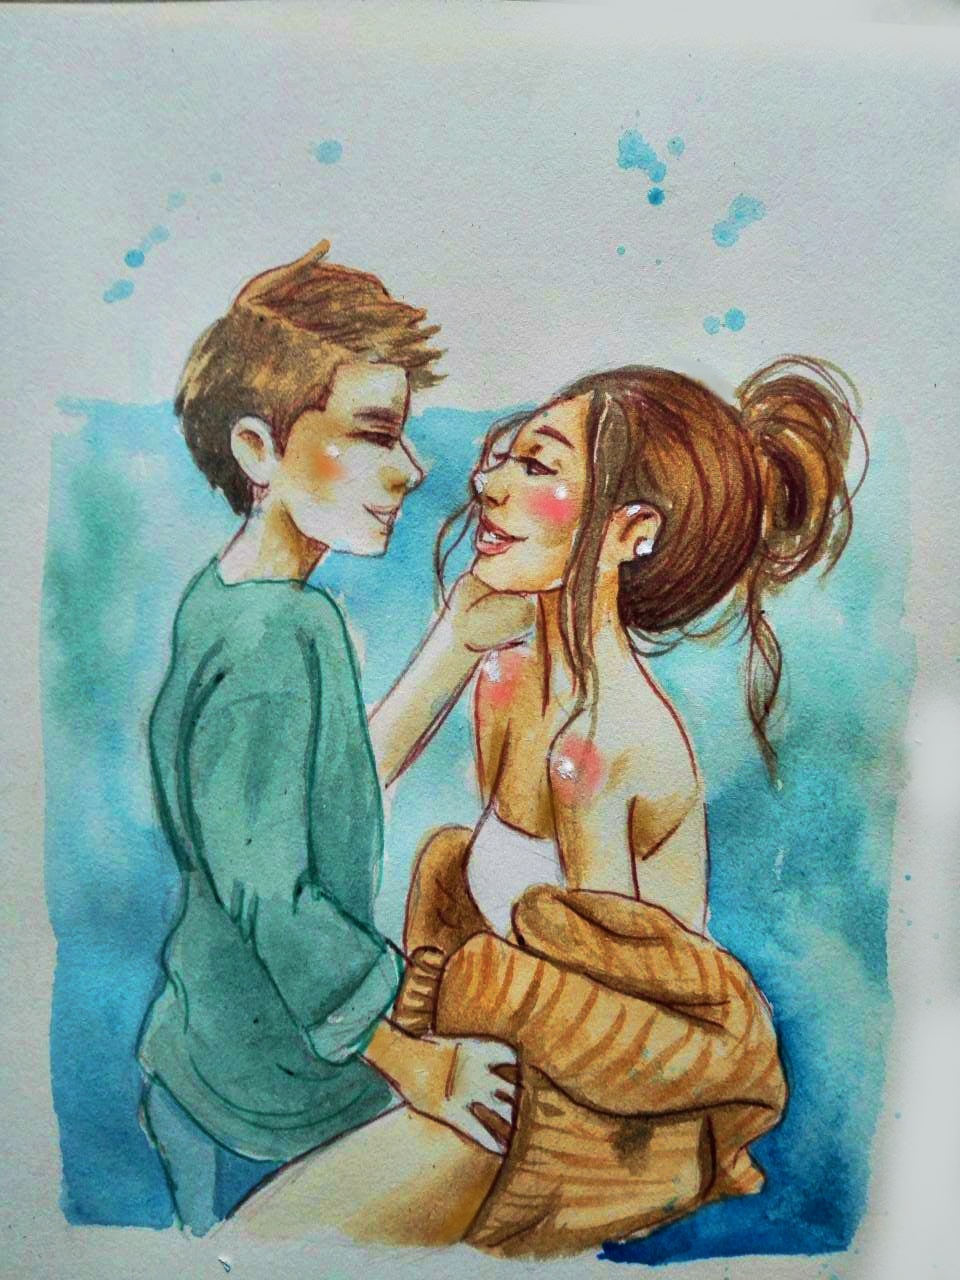 A quick doodle I drew of my boyfriend and I for our anniversary : r/drawing